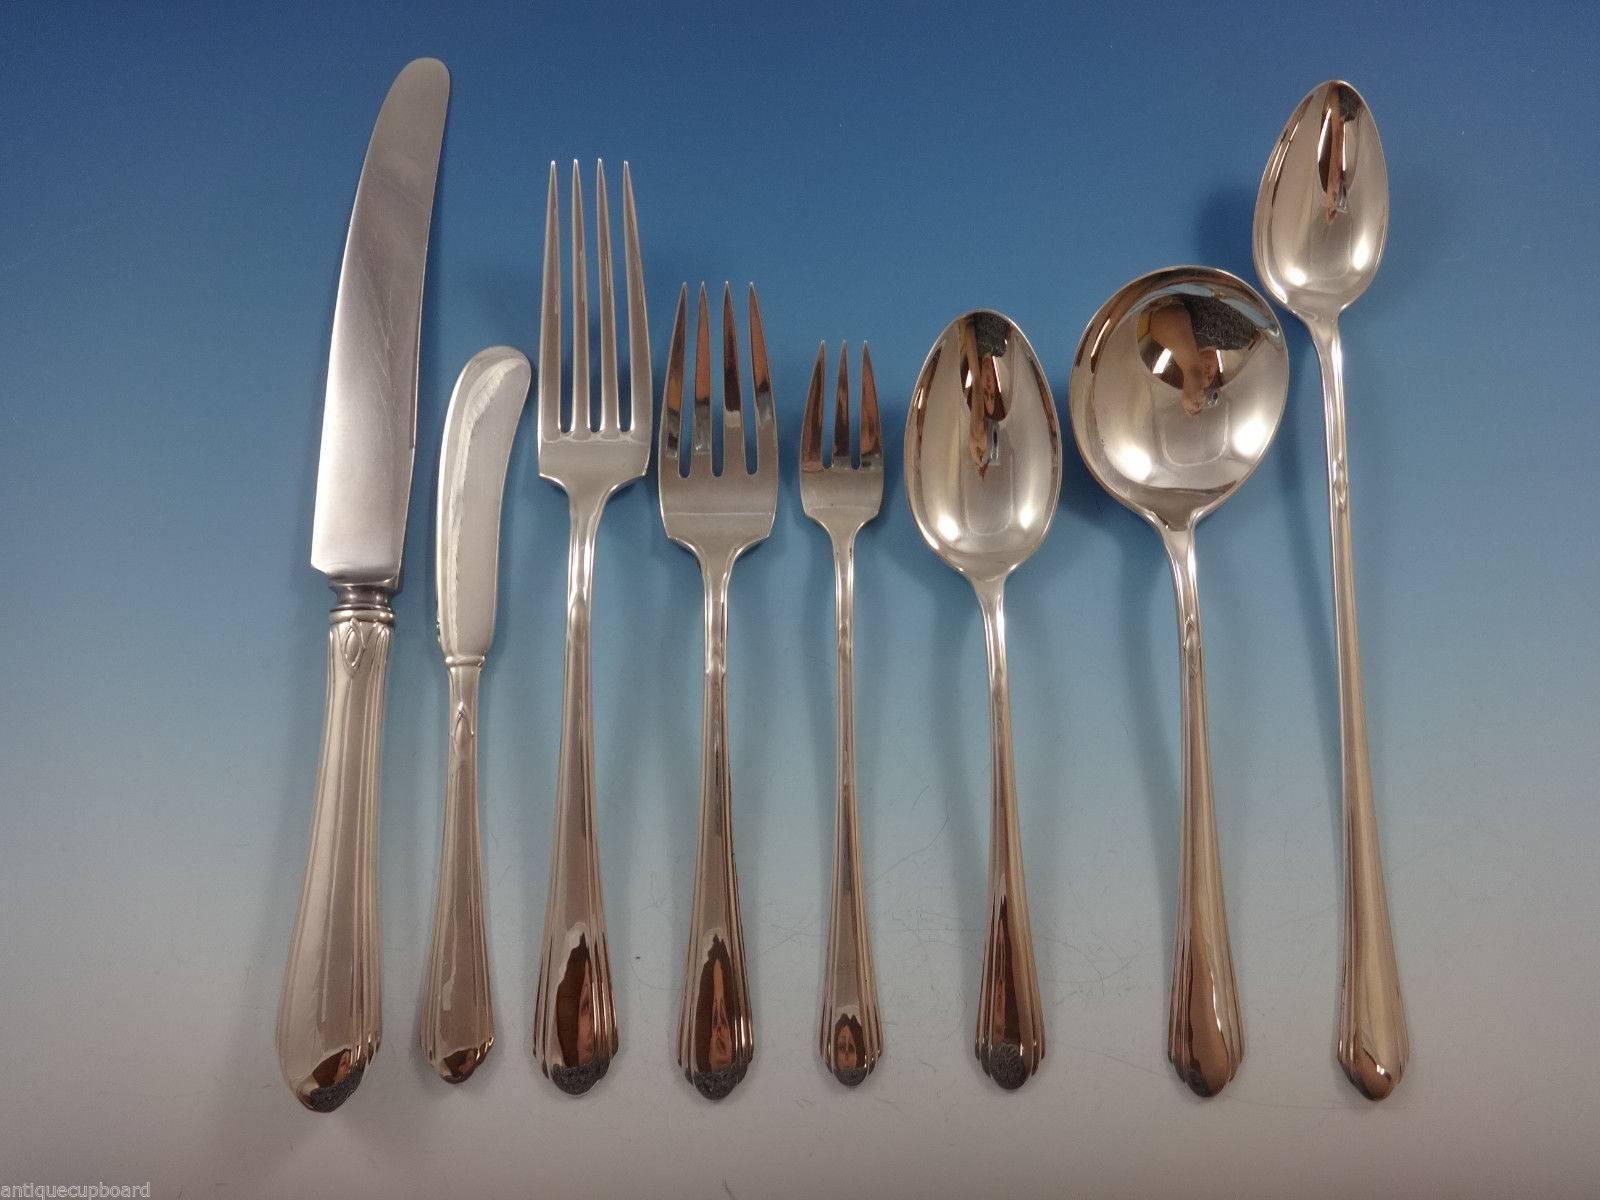 Lady Diana by Towle sterling silver flatware set - 101 pieces. This set includes:

12 knives, 8 3/4